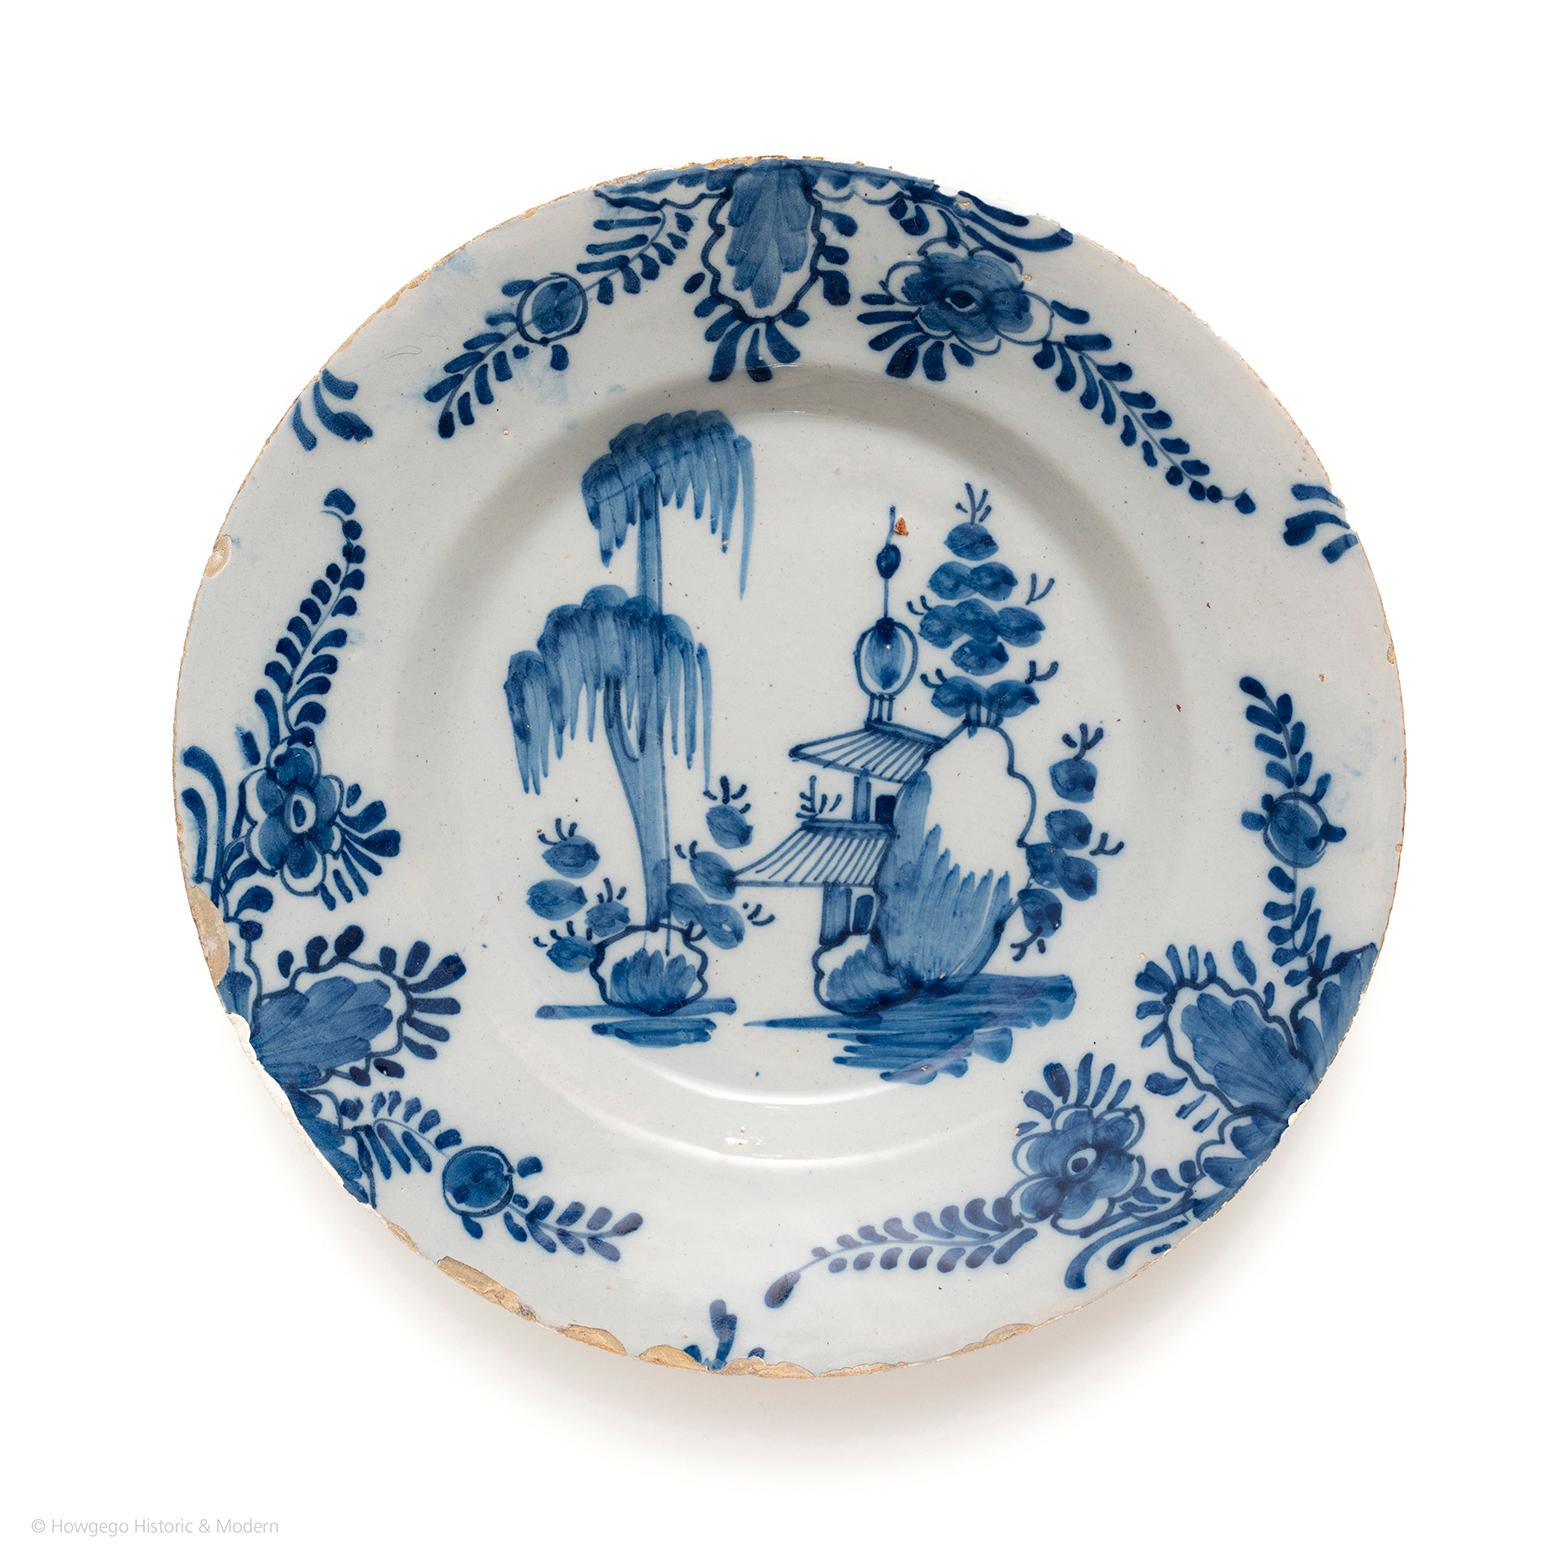 Beautiful bold painting showing the European interpretation of China and the exotic landscape.

Painted with a chinoiserie landscape scene with a pagoda in a wooded garden. The rim painted with three repeats of floral and rocky sprays. Painted in